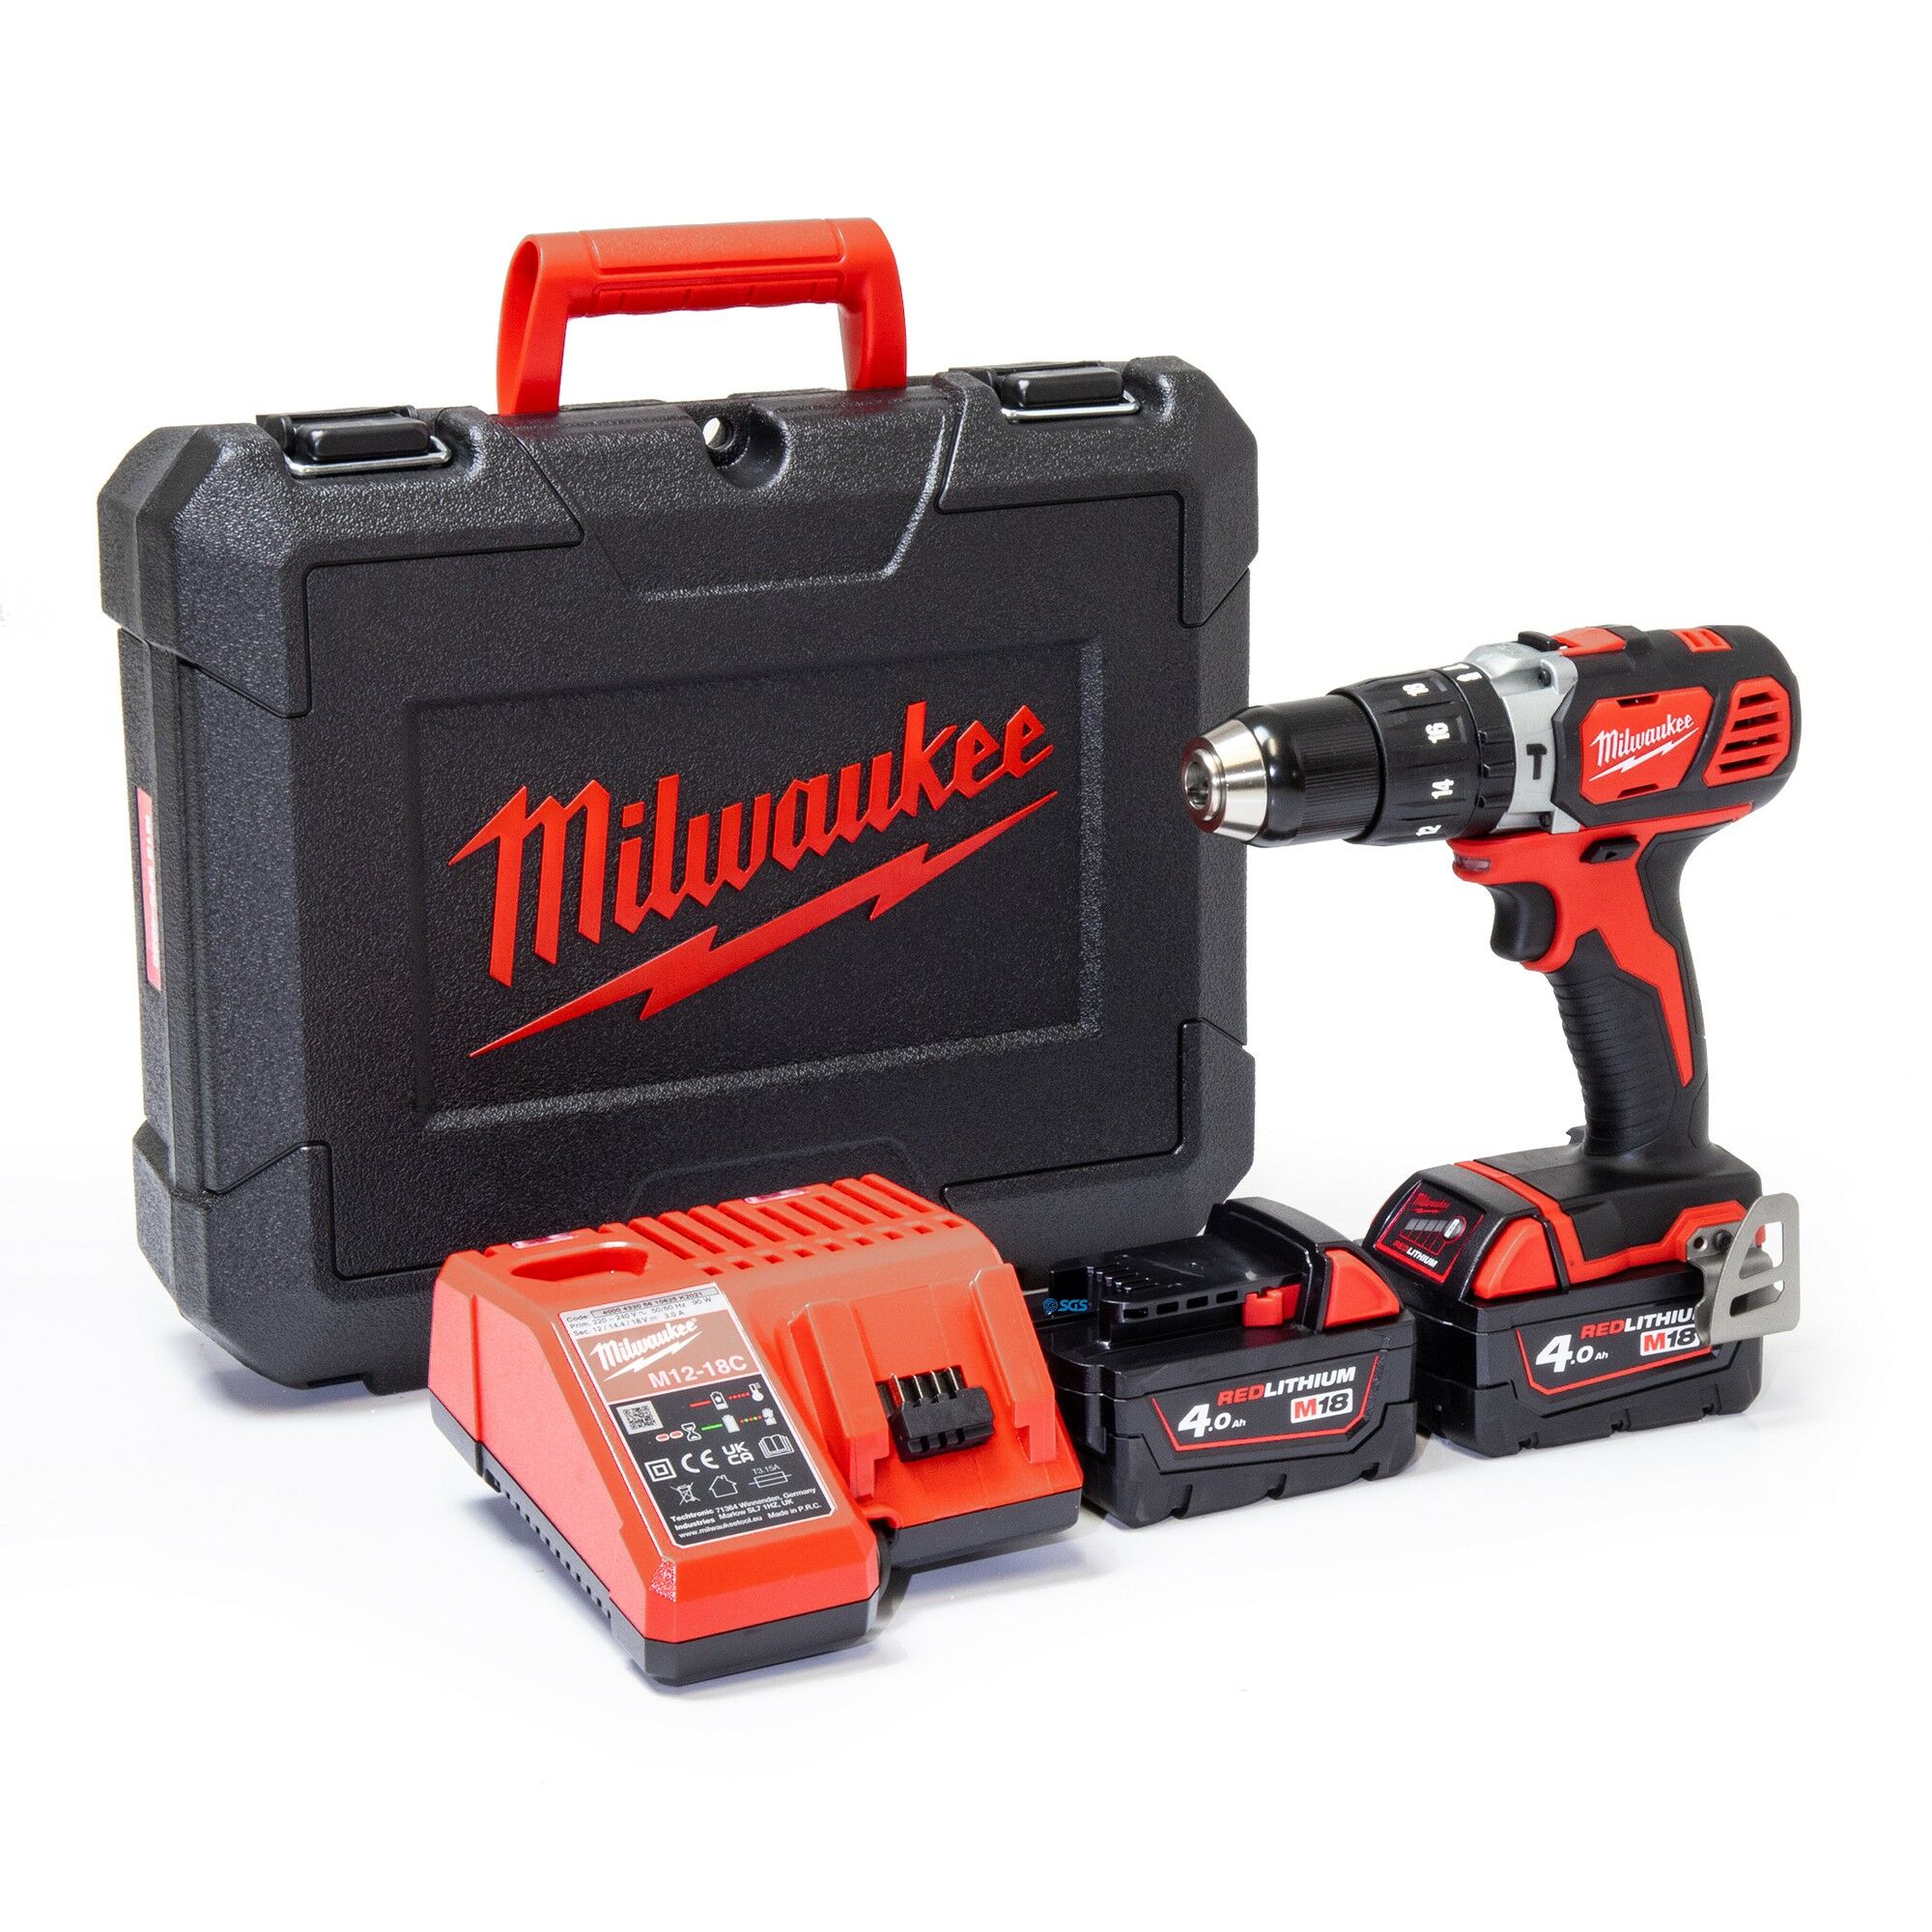 Milwaukee M18BPD-402C M18 18V Combi Drill Kit - 2x 4Ah Batteries, Charger and Case